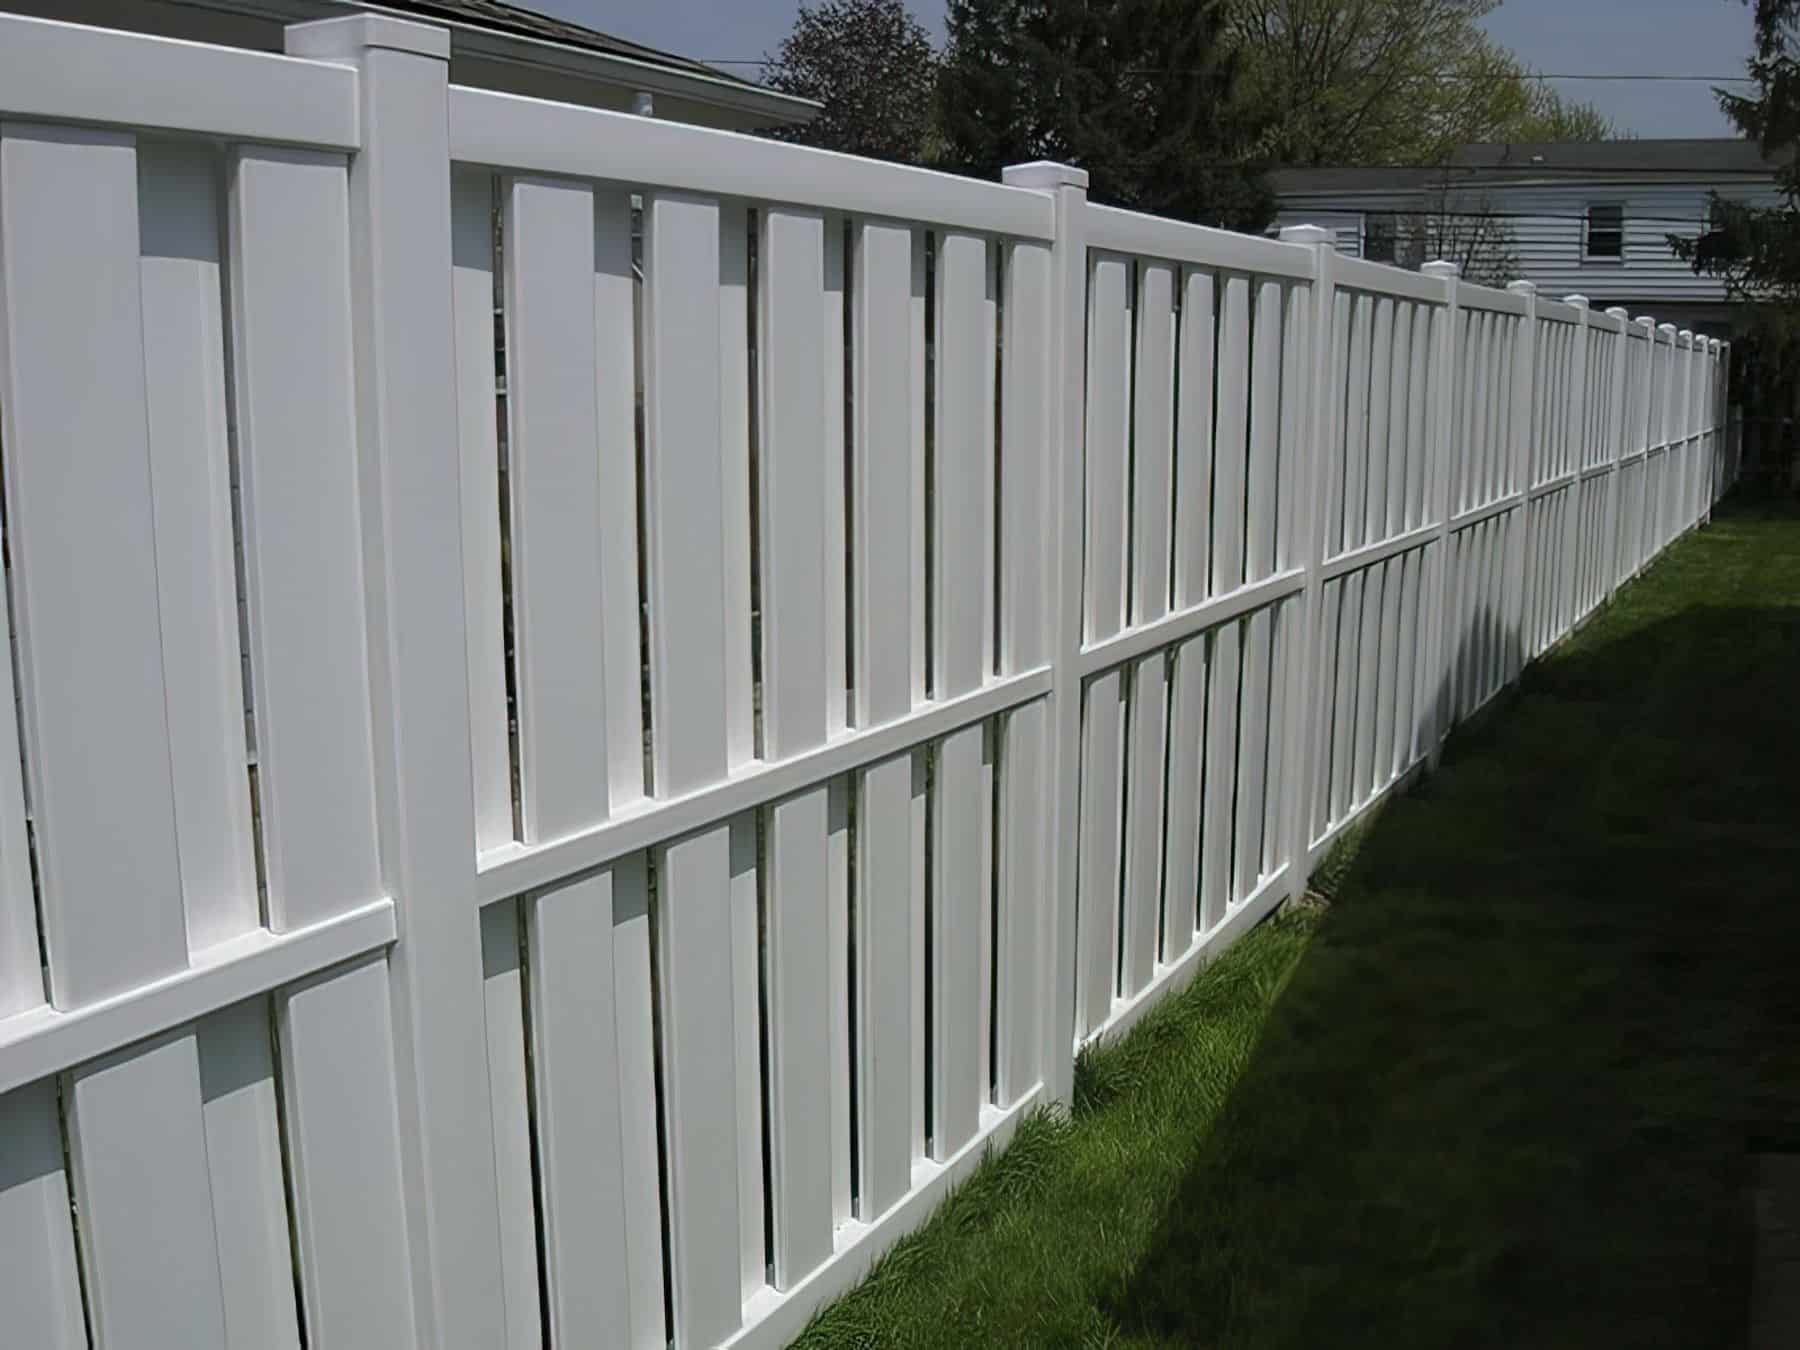 Vinyl vertical picket fence adjacent to lush green grass frames the boundary of the house.